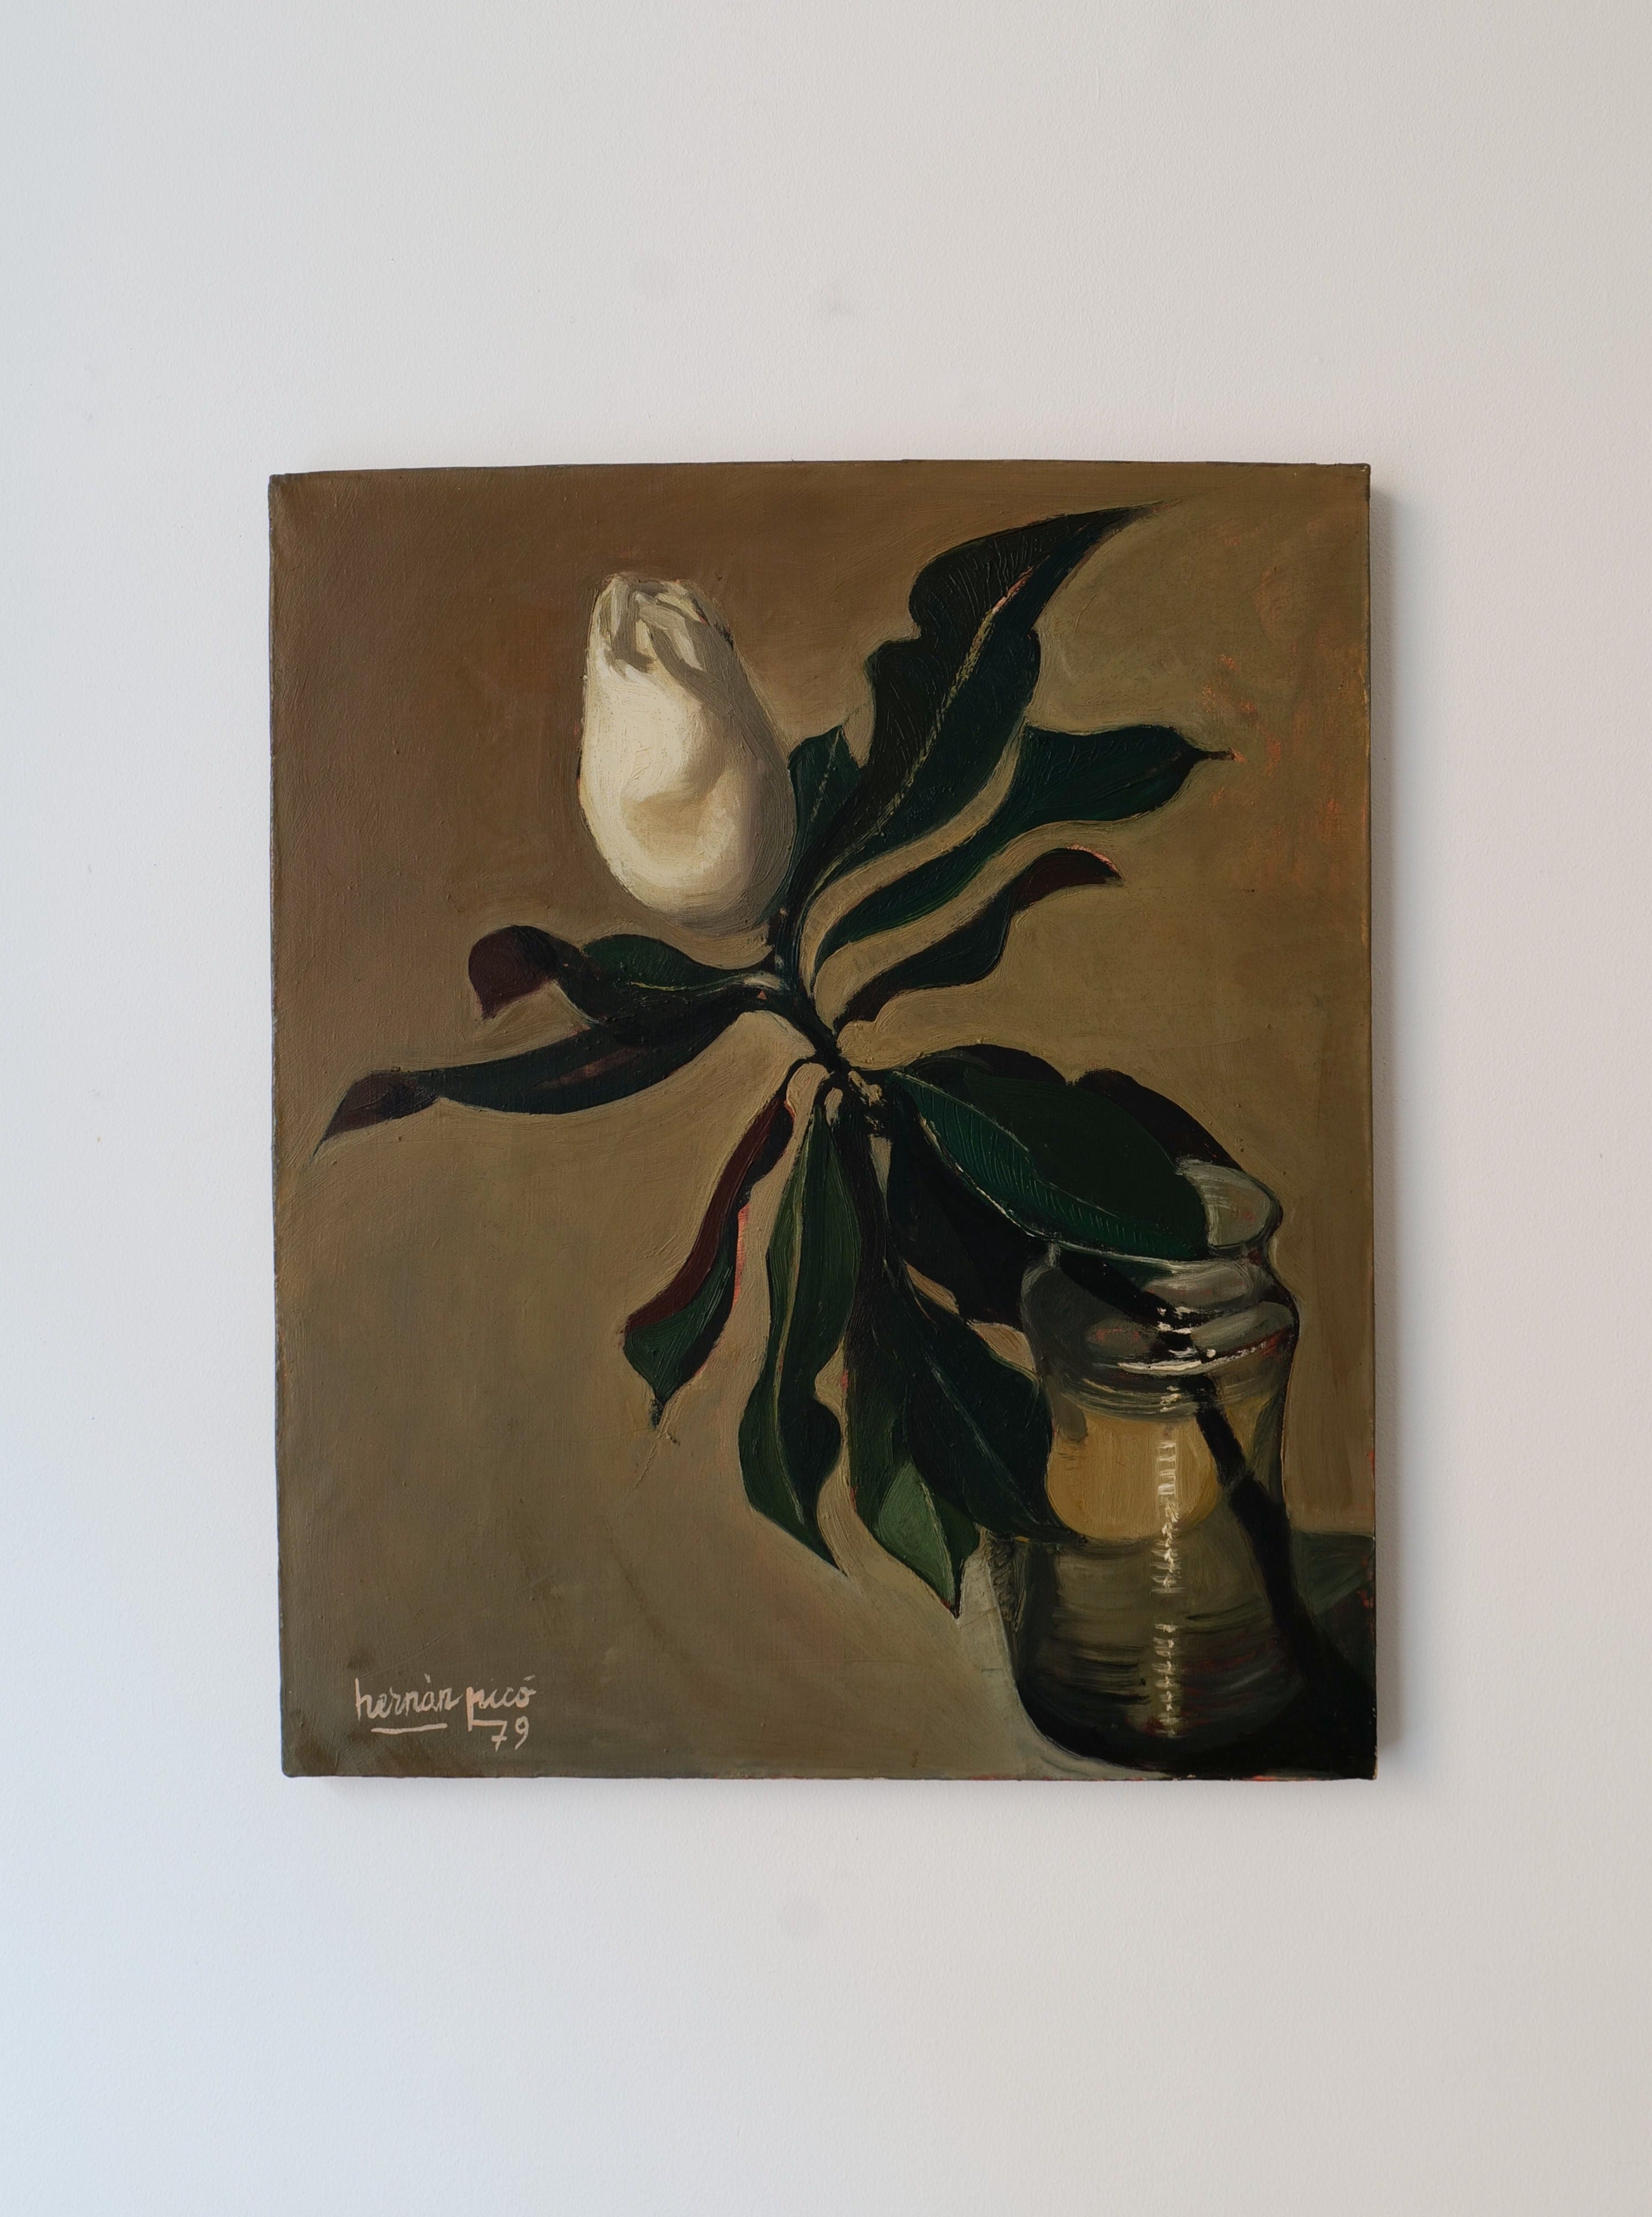 Oil painting of a Magnolia Grandiflora 1979 stem in a clear jar, set against a muted brown background. The painting has a signature at the bottom left that reads "Hernán Picó Ribera 79" from the Collection Apart brand.